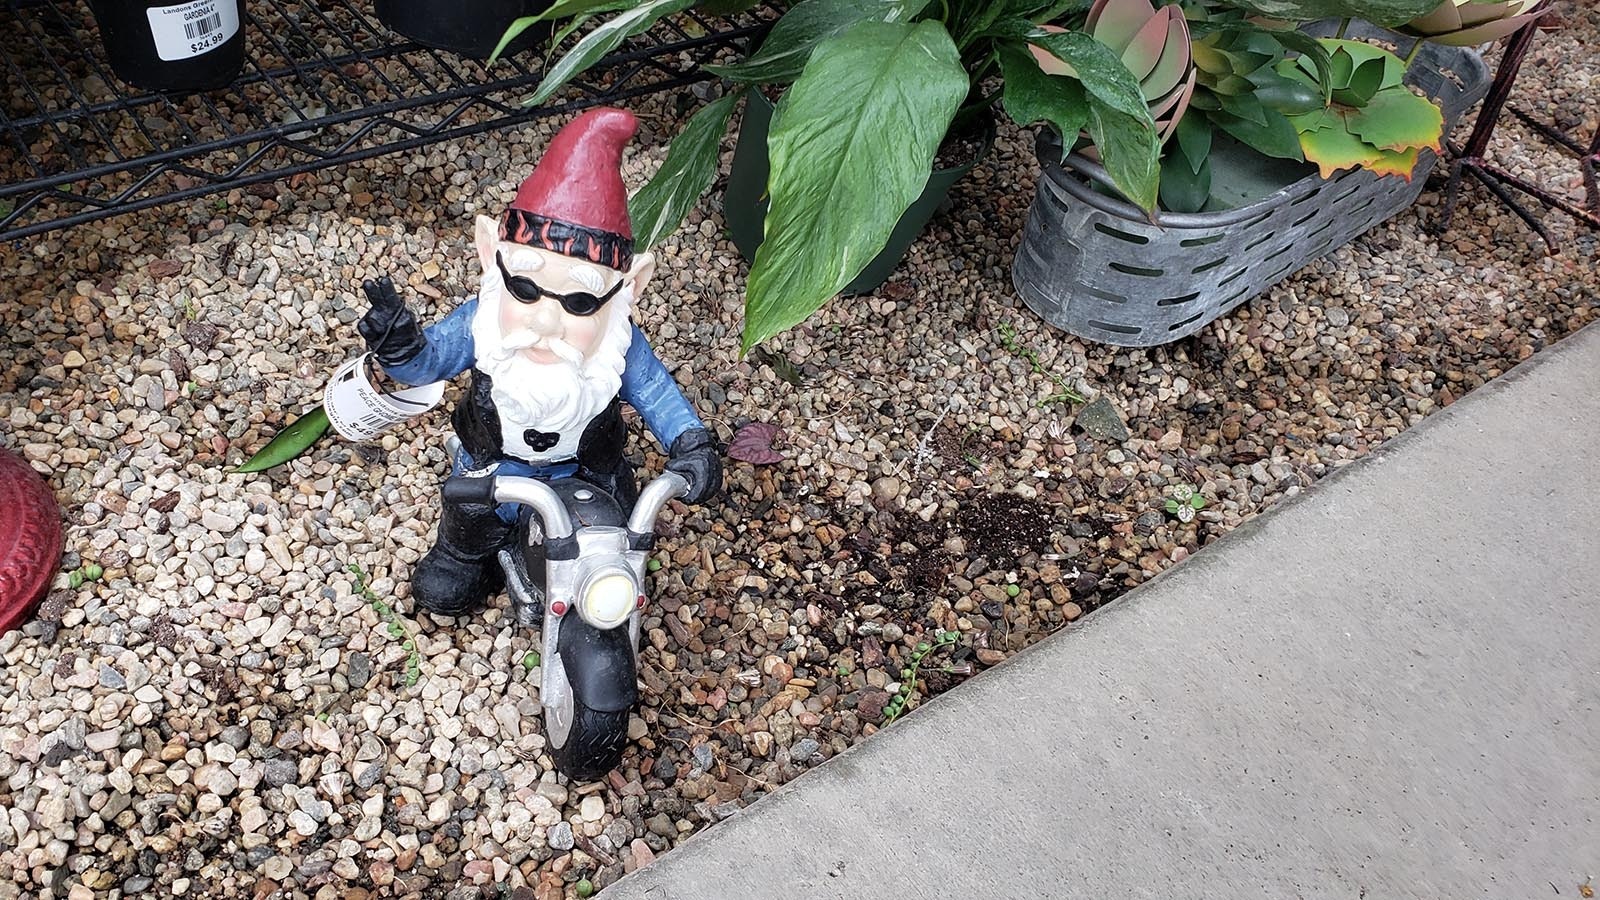 One tough gnome, but not the official gnome of the greenhouse.